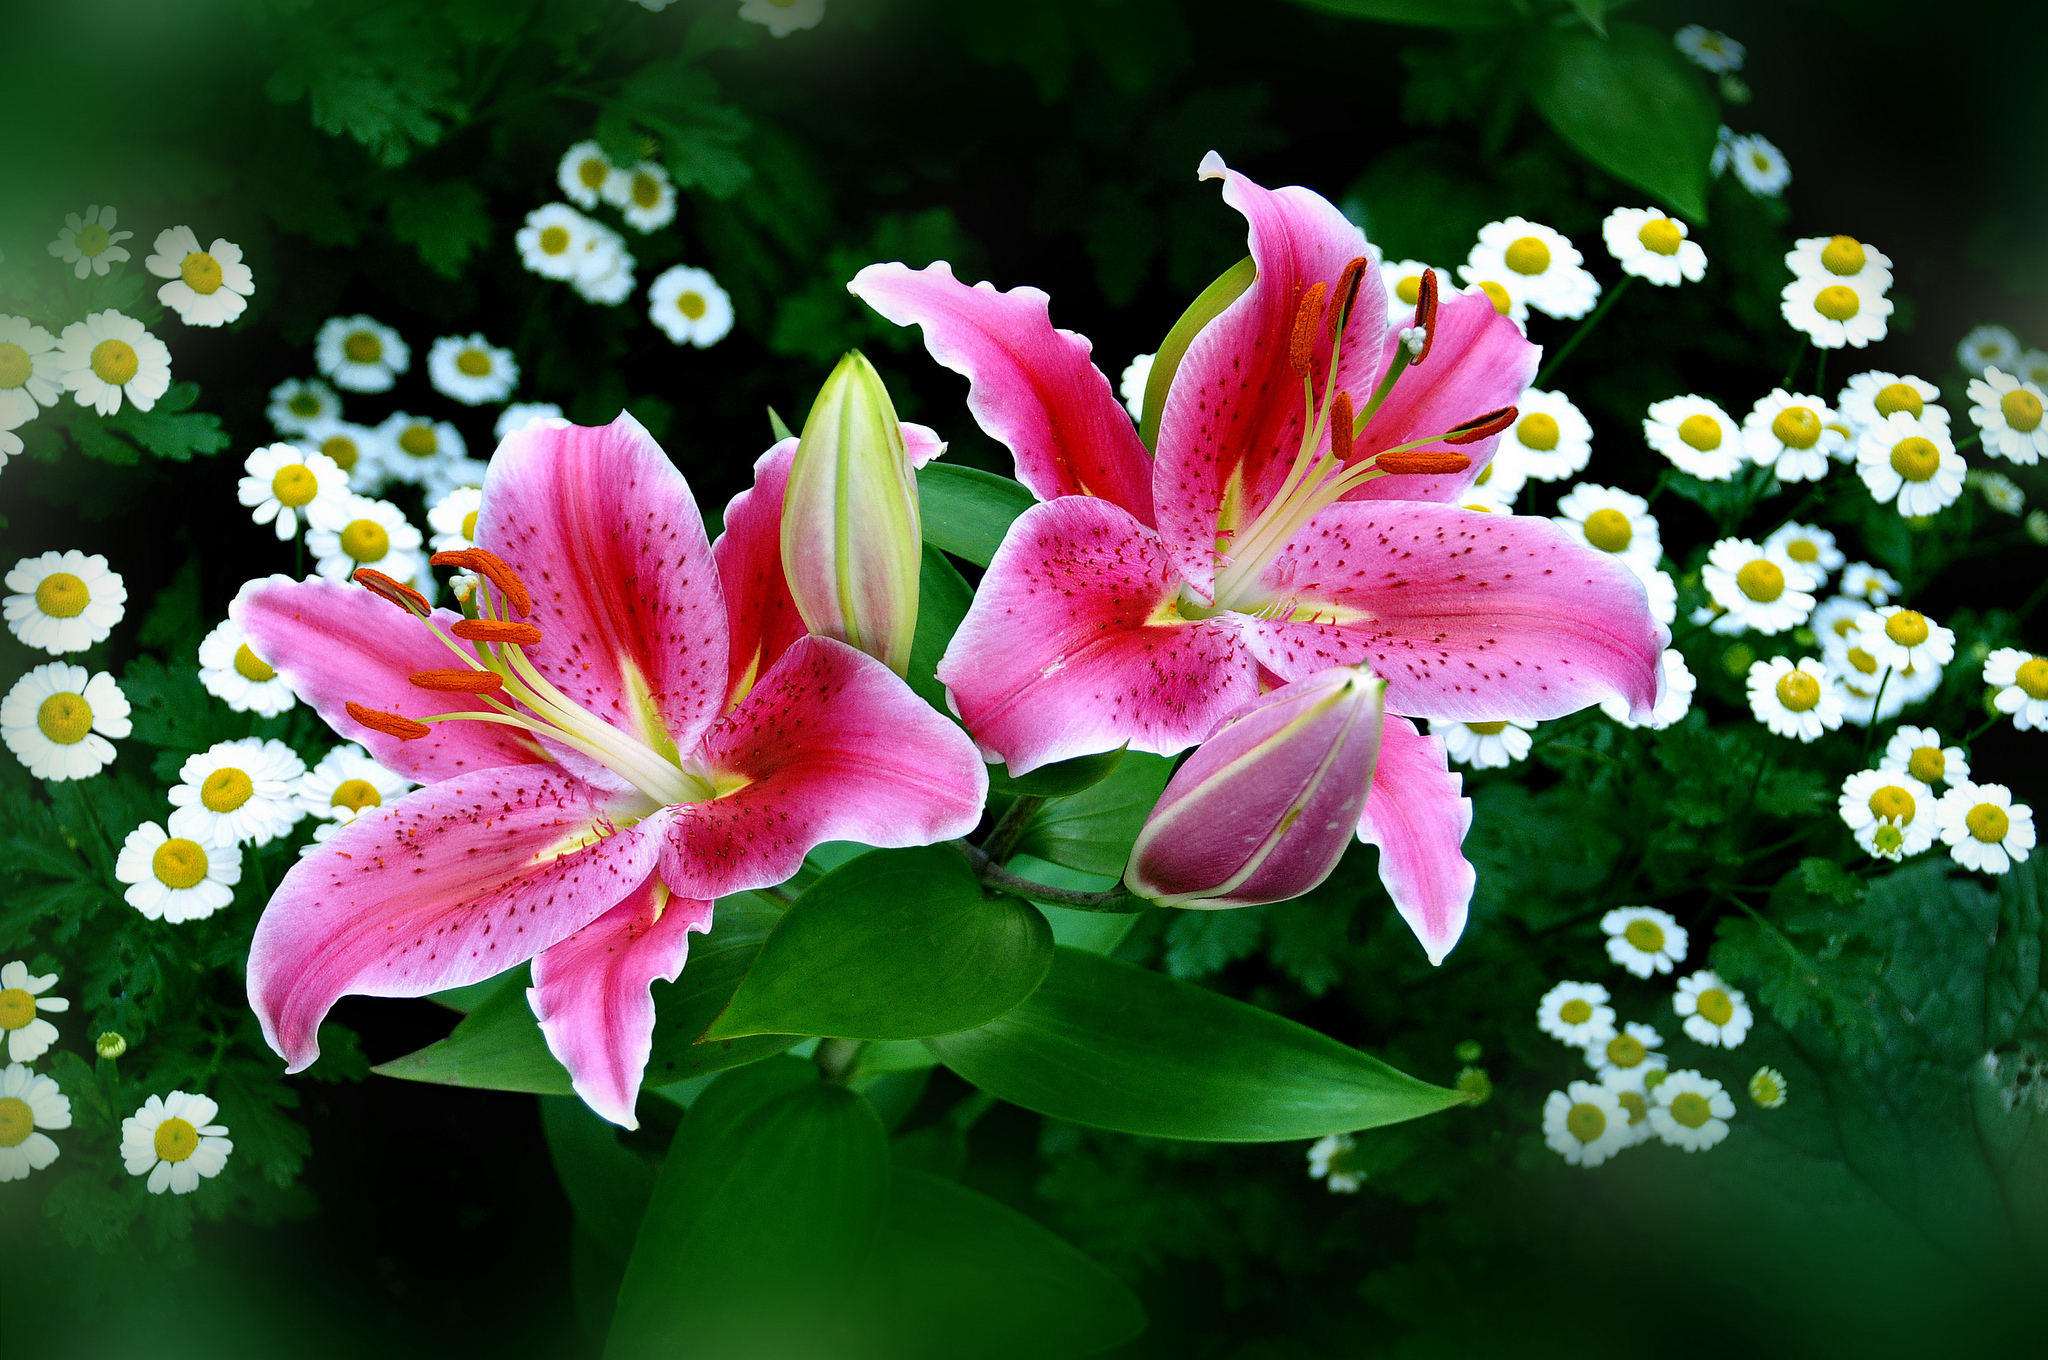 General 2048x1360 flowers white flowers pink flowers lilies plants outdoors closeup